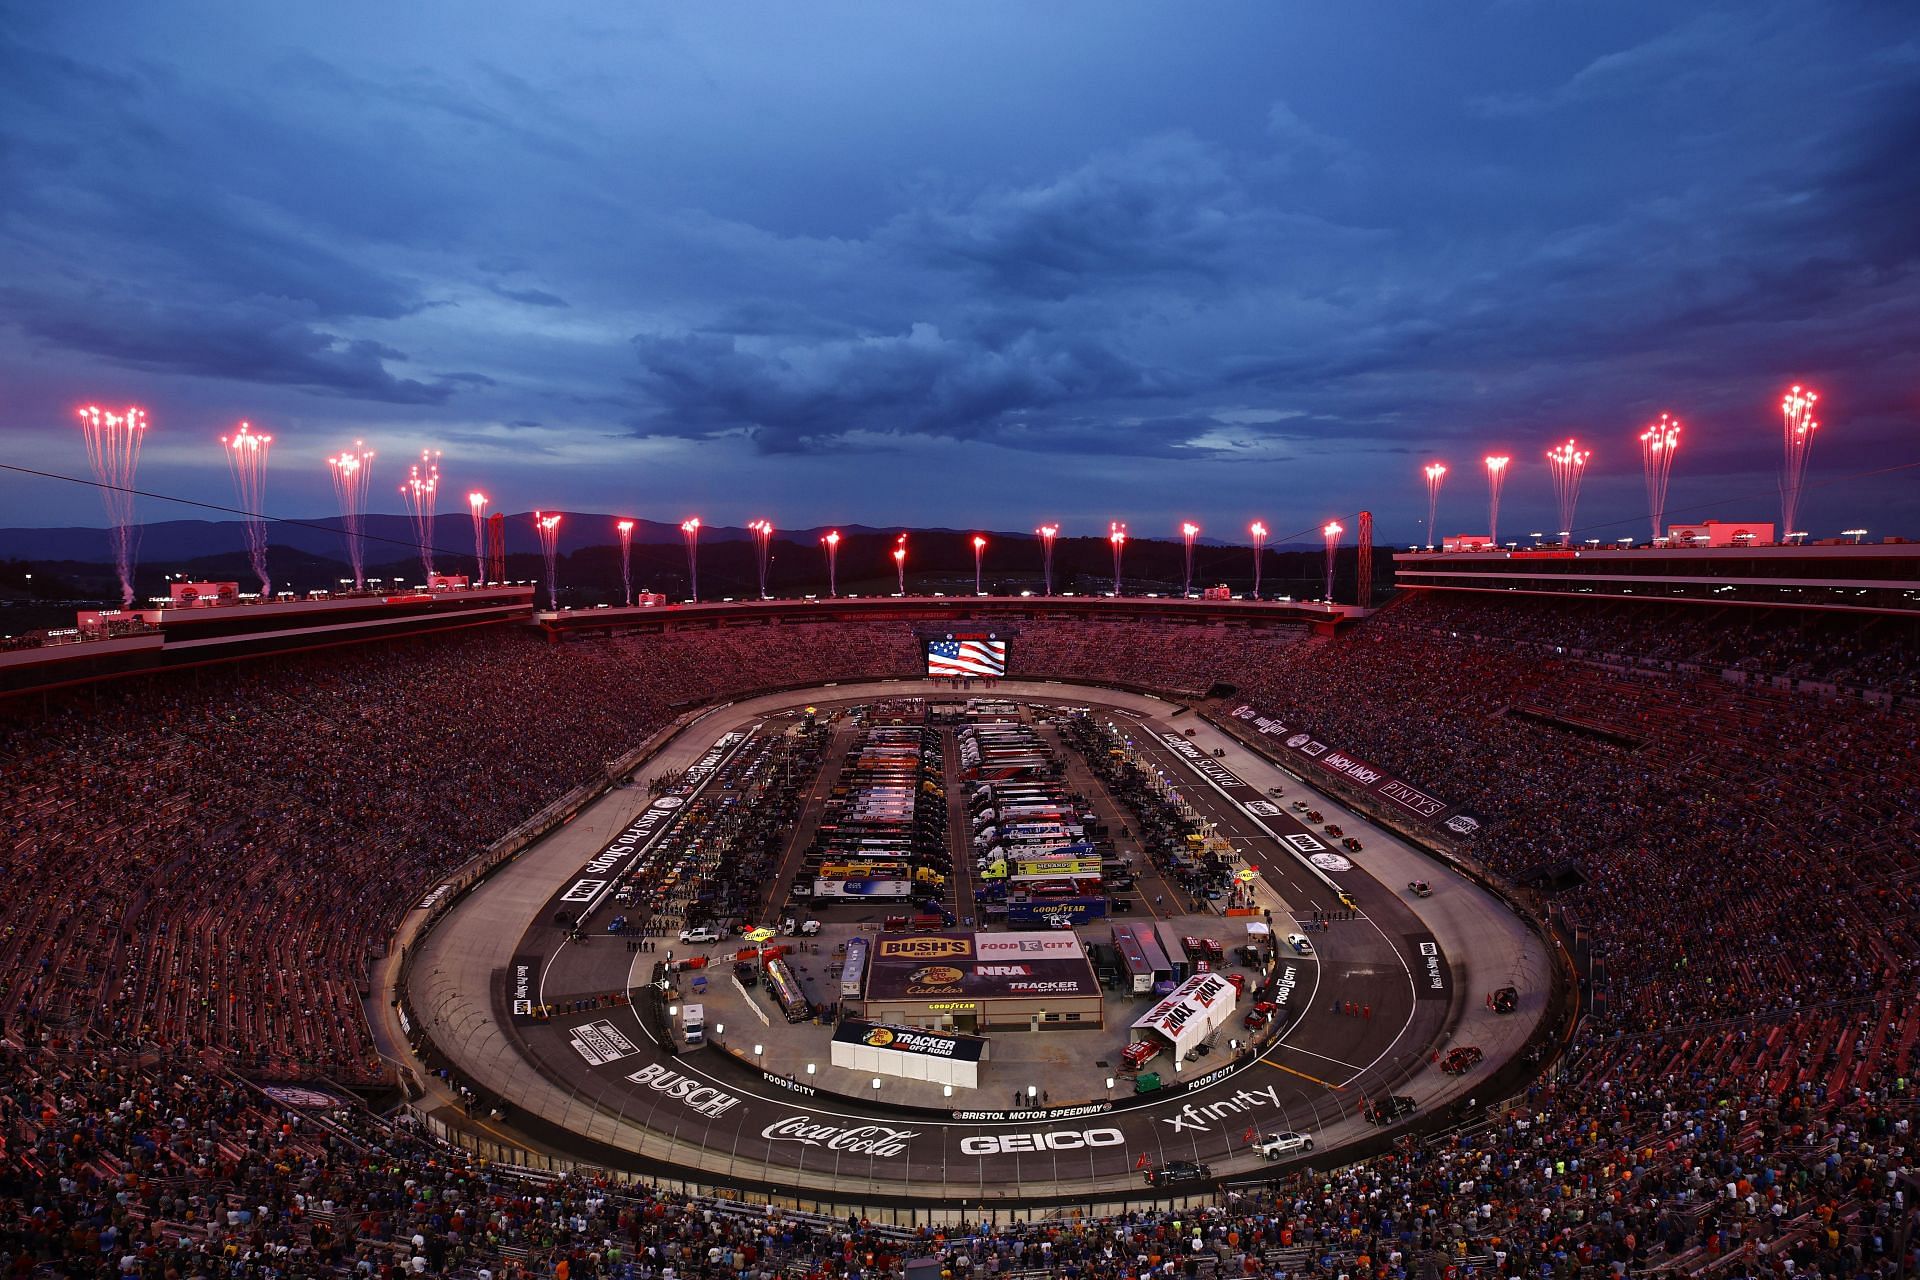 A general view of the speedway during pre-race ceremonies before the 2021 NASCAR Cup Series Bass Pro Shops Night Race at Bristol Motor Speedway in Bristol, Tennessee. (Photo by Jared C. Tilton/Getty Images)